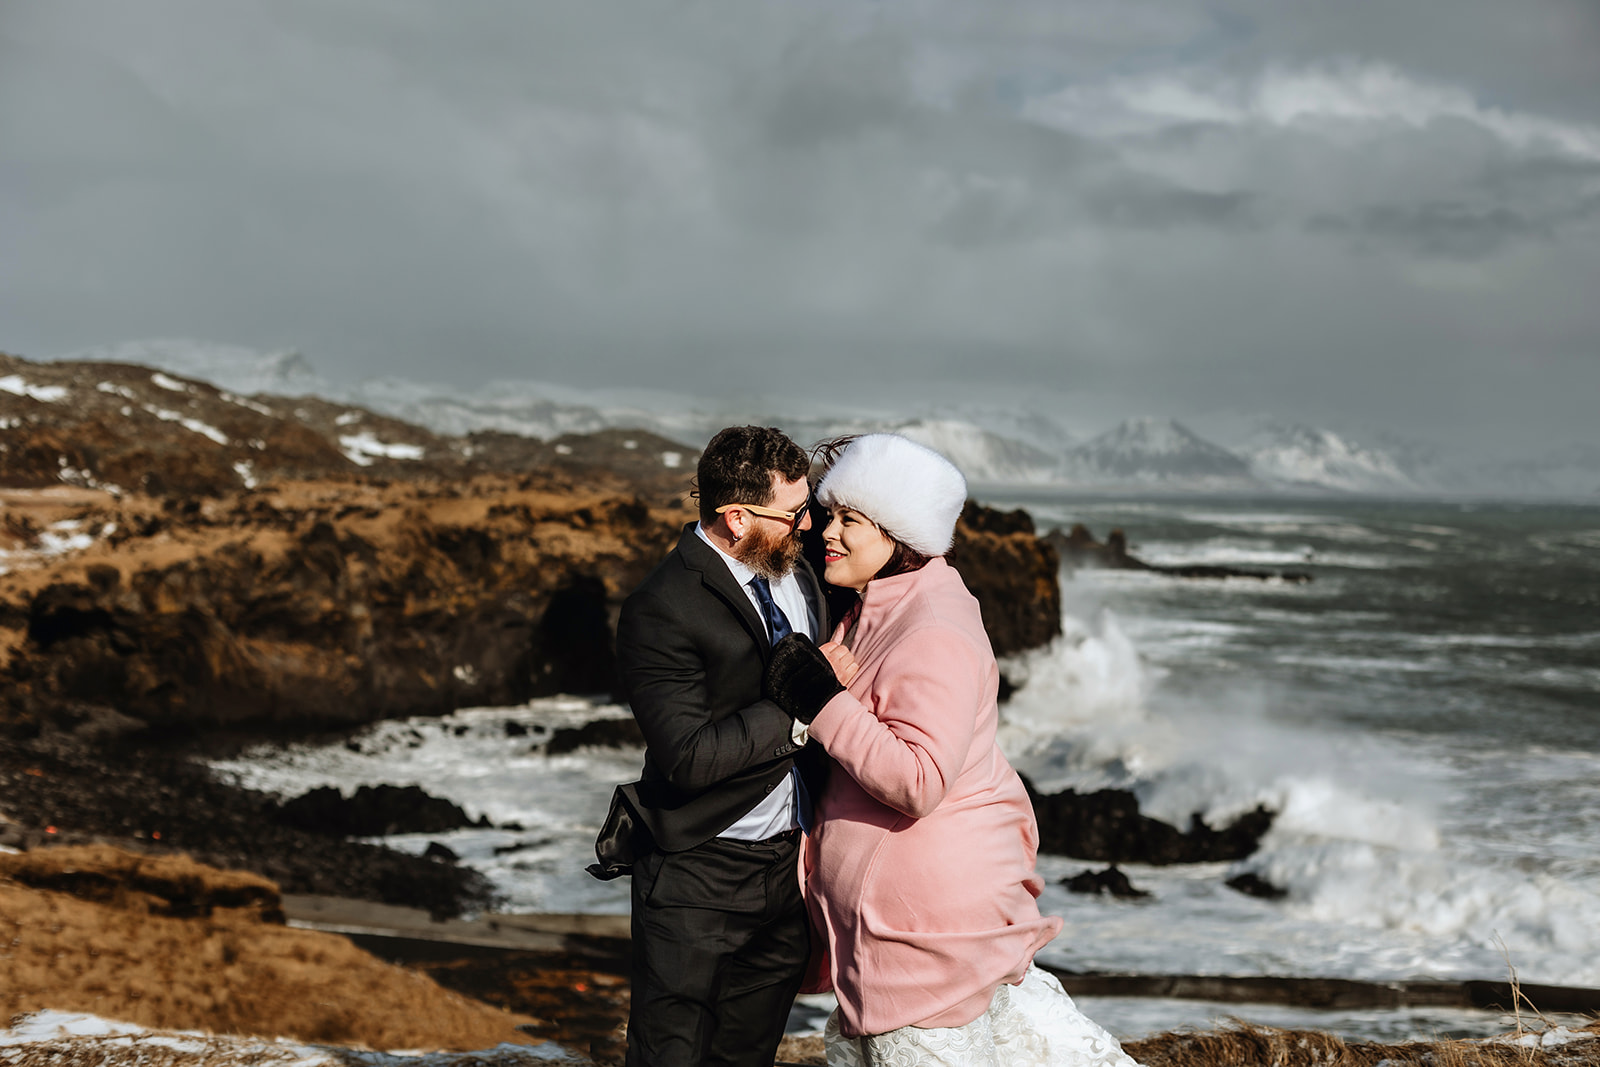 Married couple is hugging in front of a stormy Ocean in Iceland on their weddign day